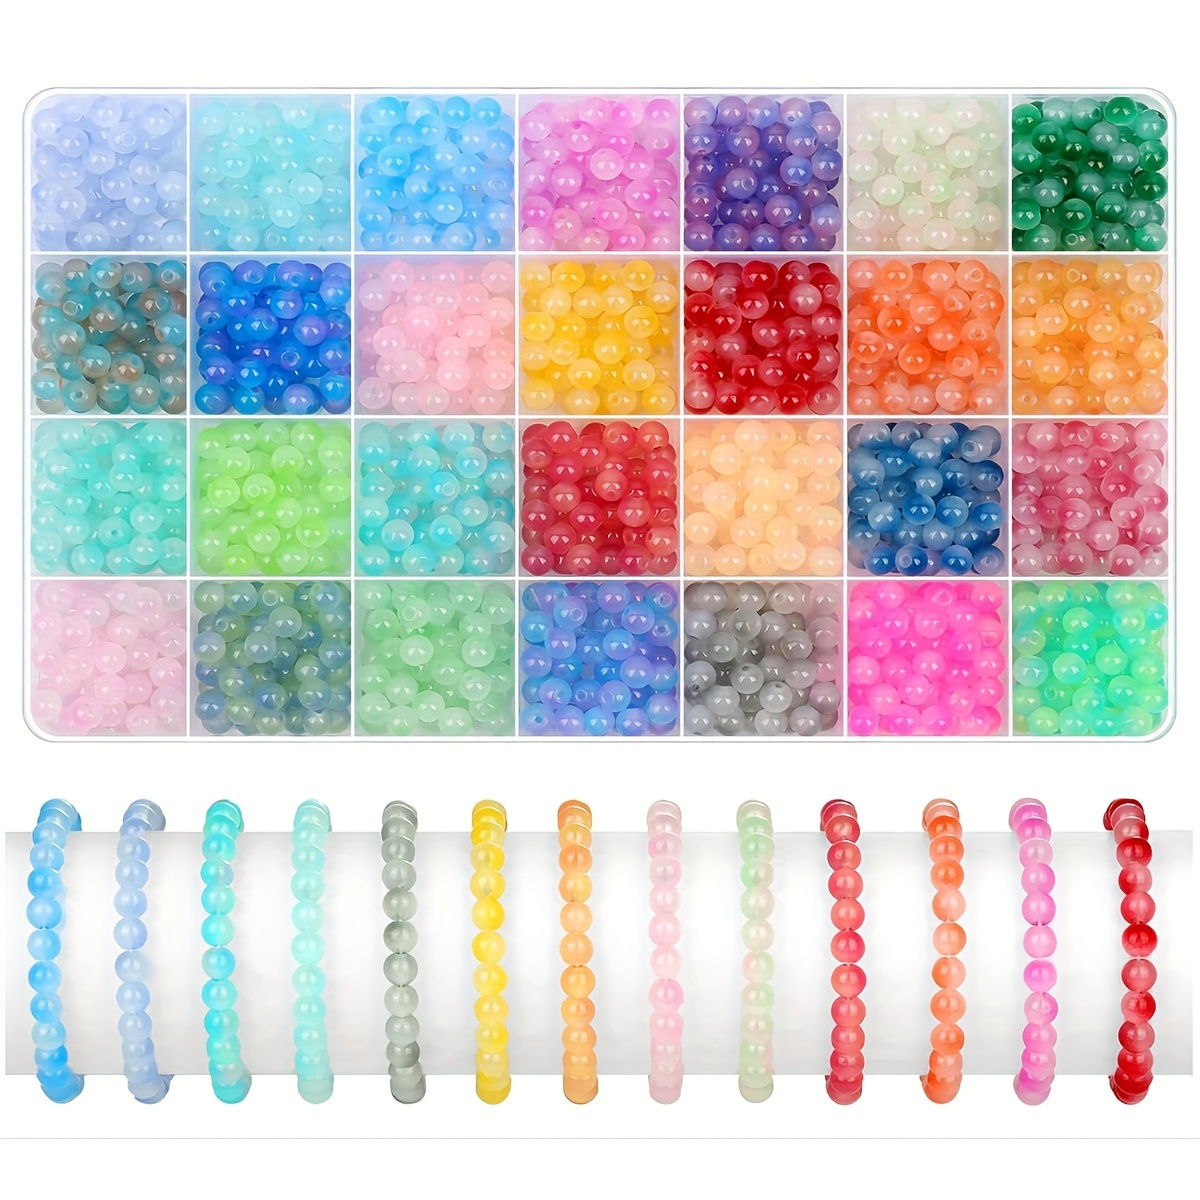 

1400 Pcs 6mm Round Glass Beads For Jewelry Making, 28 Color Round Glass Beads For Bracelet Jewelry Making And Diy Crafts